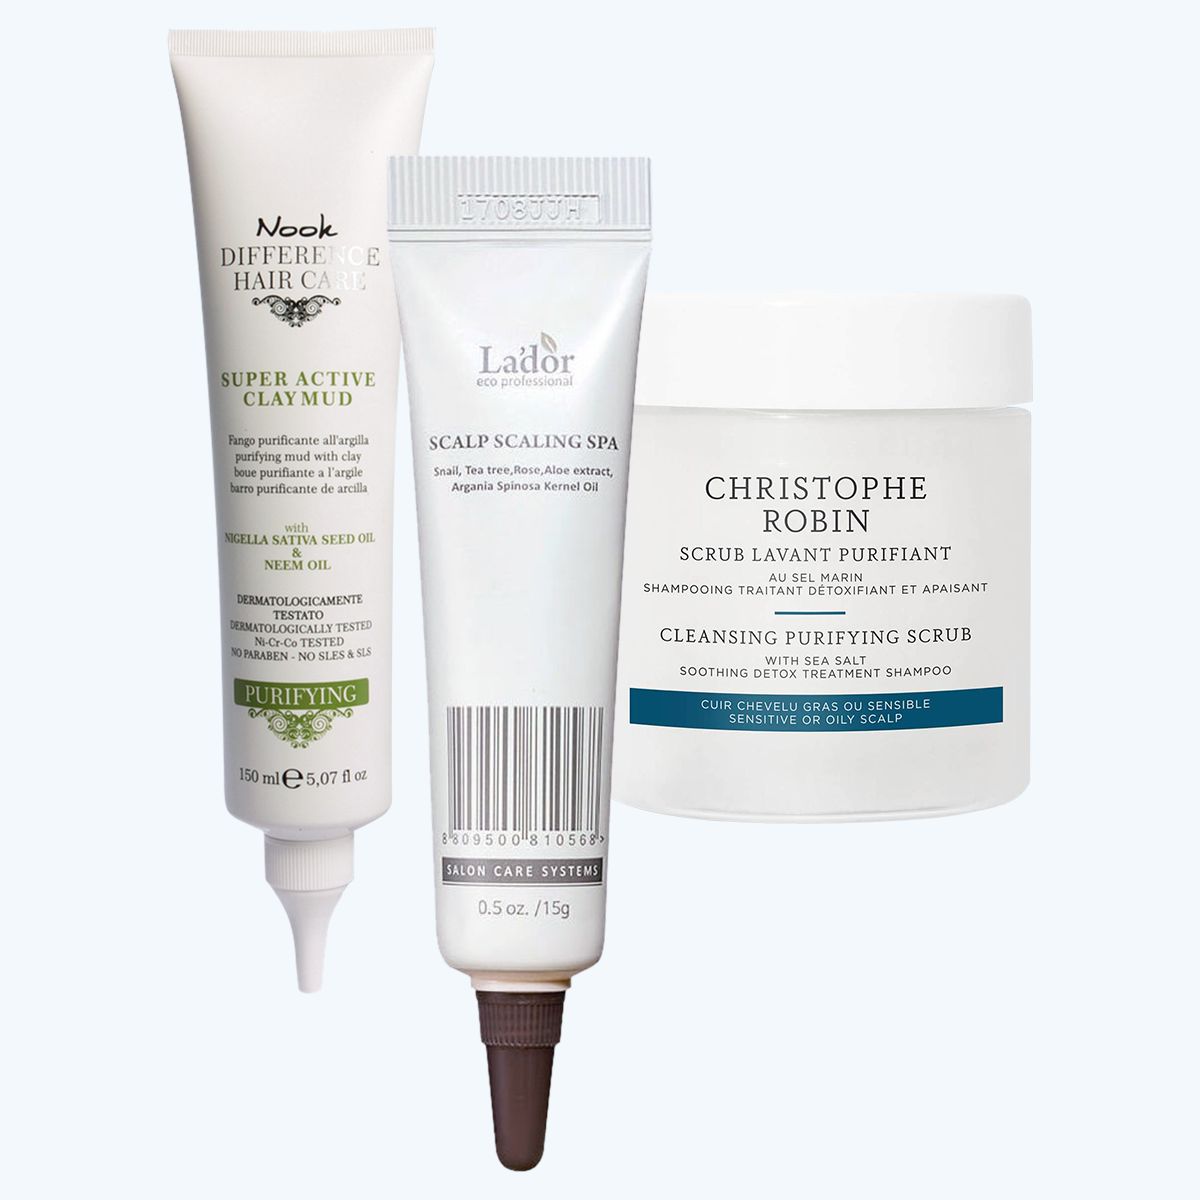 Nook Difference Hair Care Purifying Clay Mud; La'dor Scalp Scaling Spa; Christophe Robin Cleansing Purifying Scrub